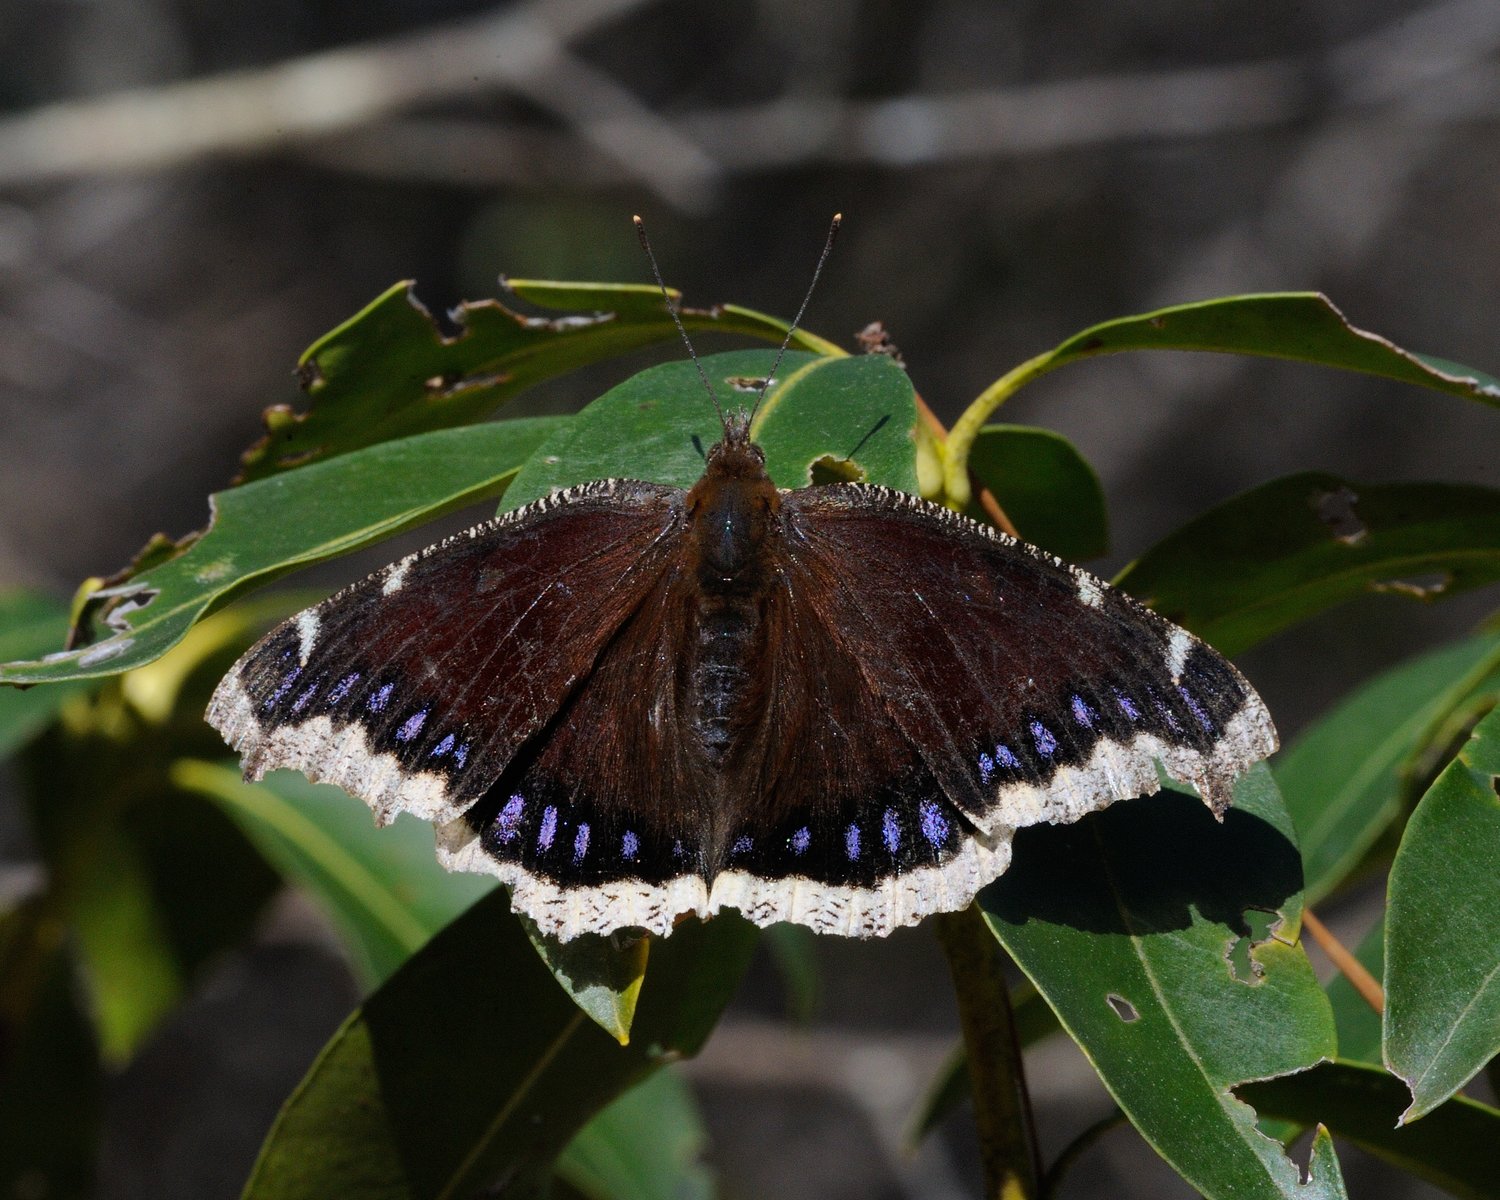 The mourning cloak’s wings are largely dark, with purple spots near the trailing edge. Both the fore- and hindwings are fringed with a band of light yellow. ..When they are seen in spring, the wings may appear somewhat tattered; after they mate in the spring, they are close to the end of their 11-month lifespan. ..The underside of the wings appears dark with less color. The yellow fringe can be seen in flight, depending on the viewing angle.